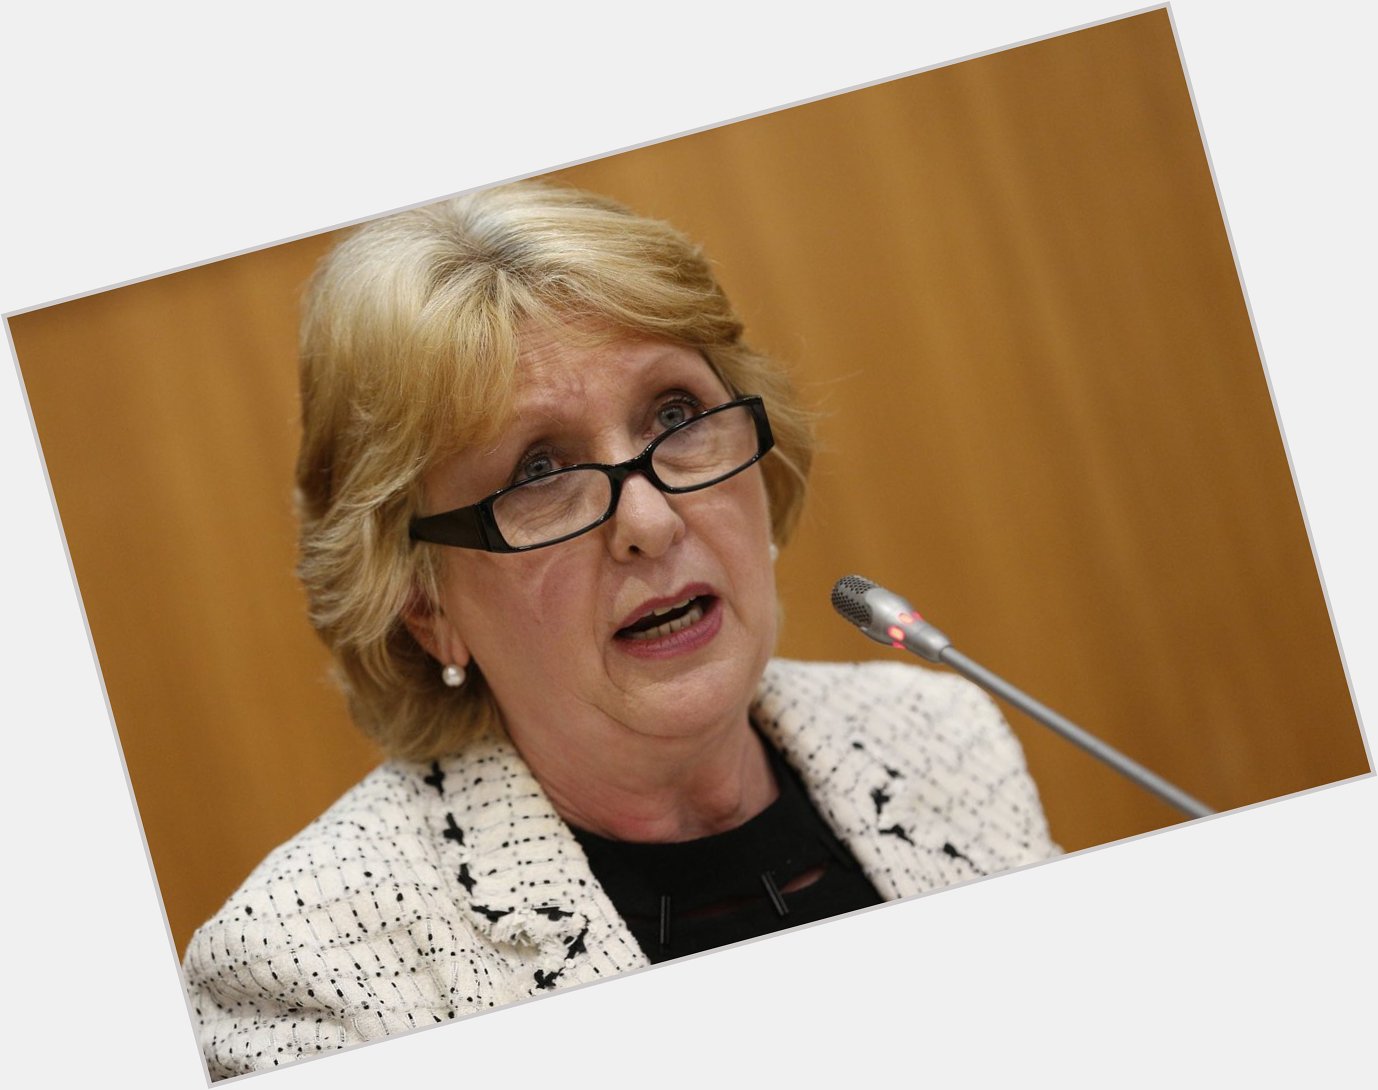 Happy birthday to Mary McAleese, Eighth President of Ireland, who is 72 today. 